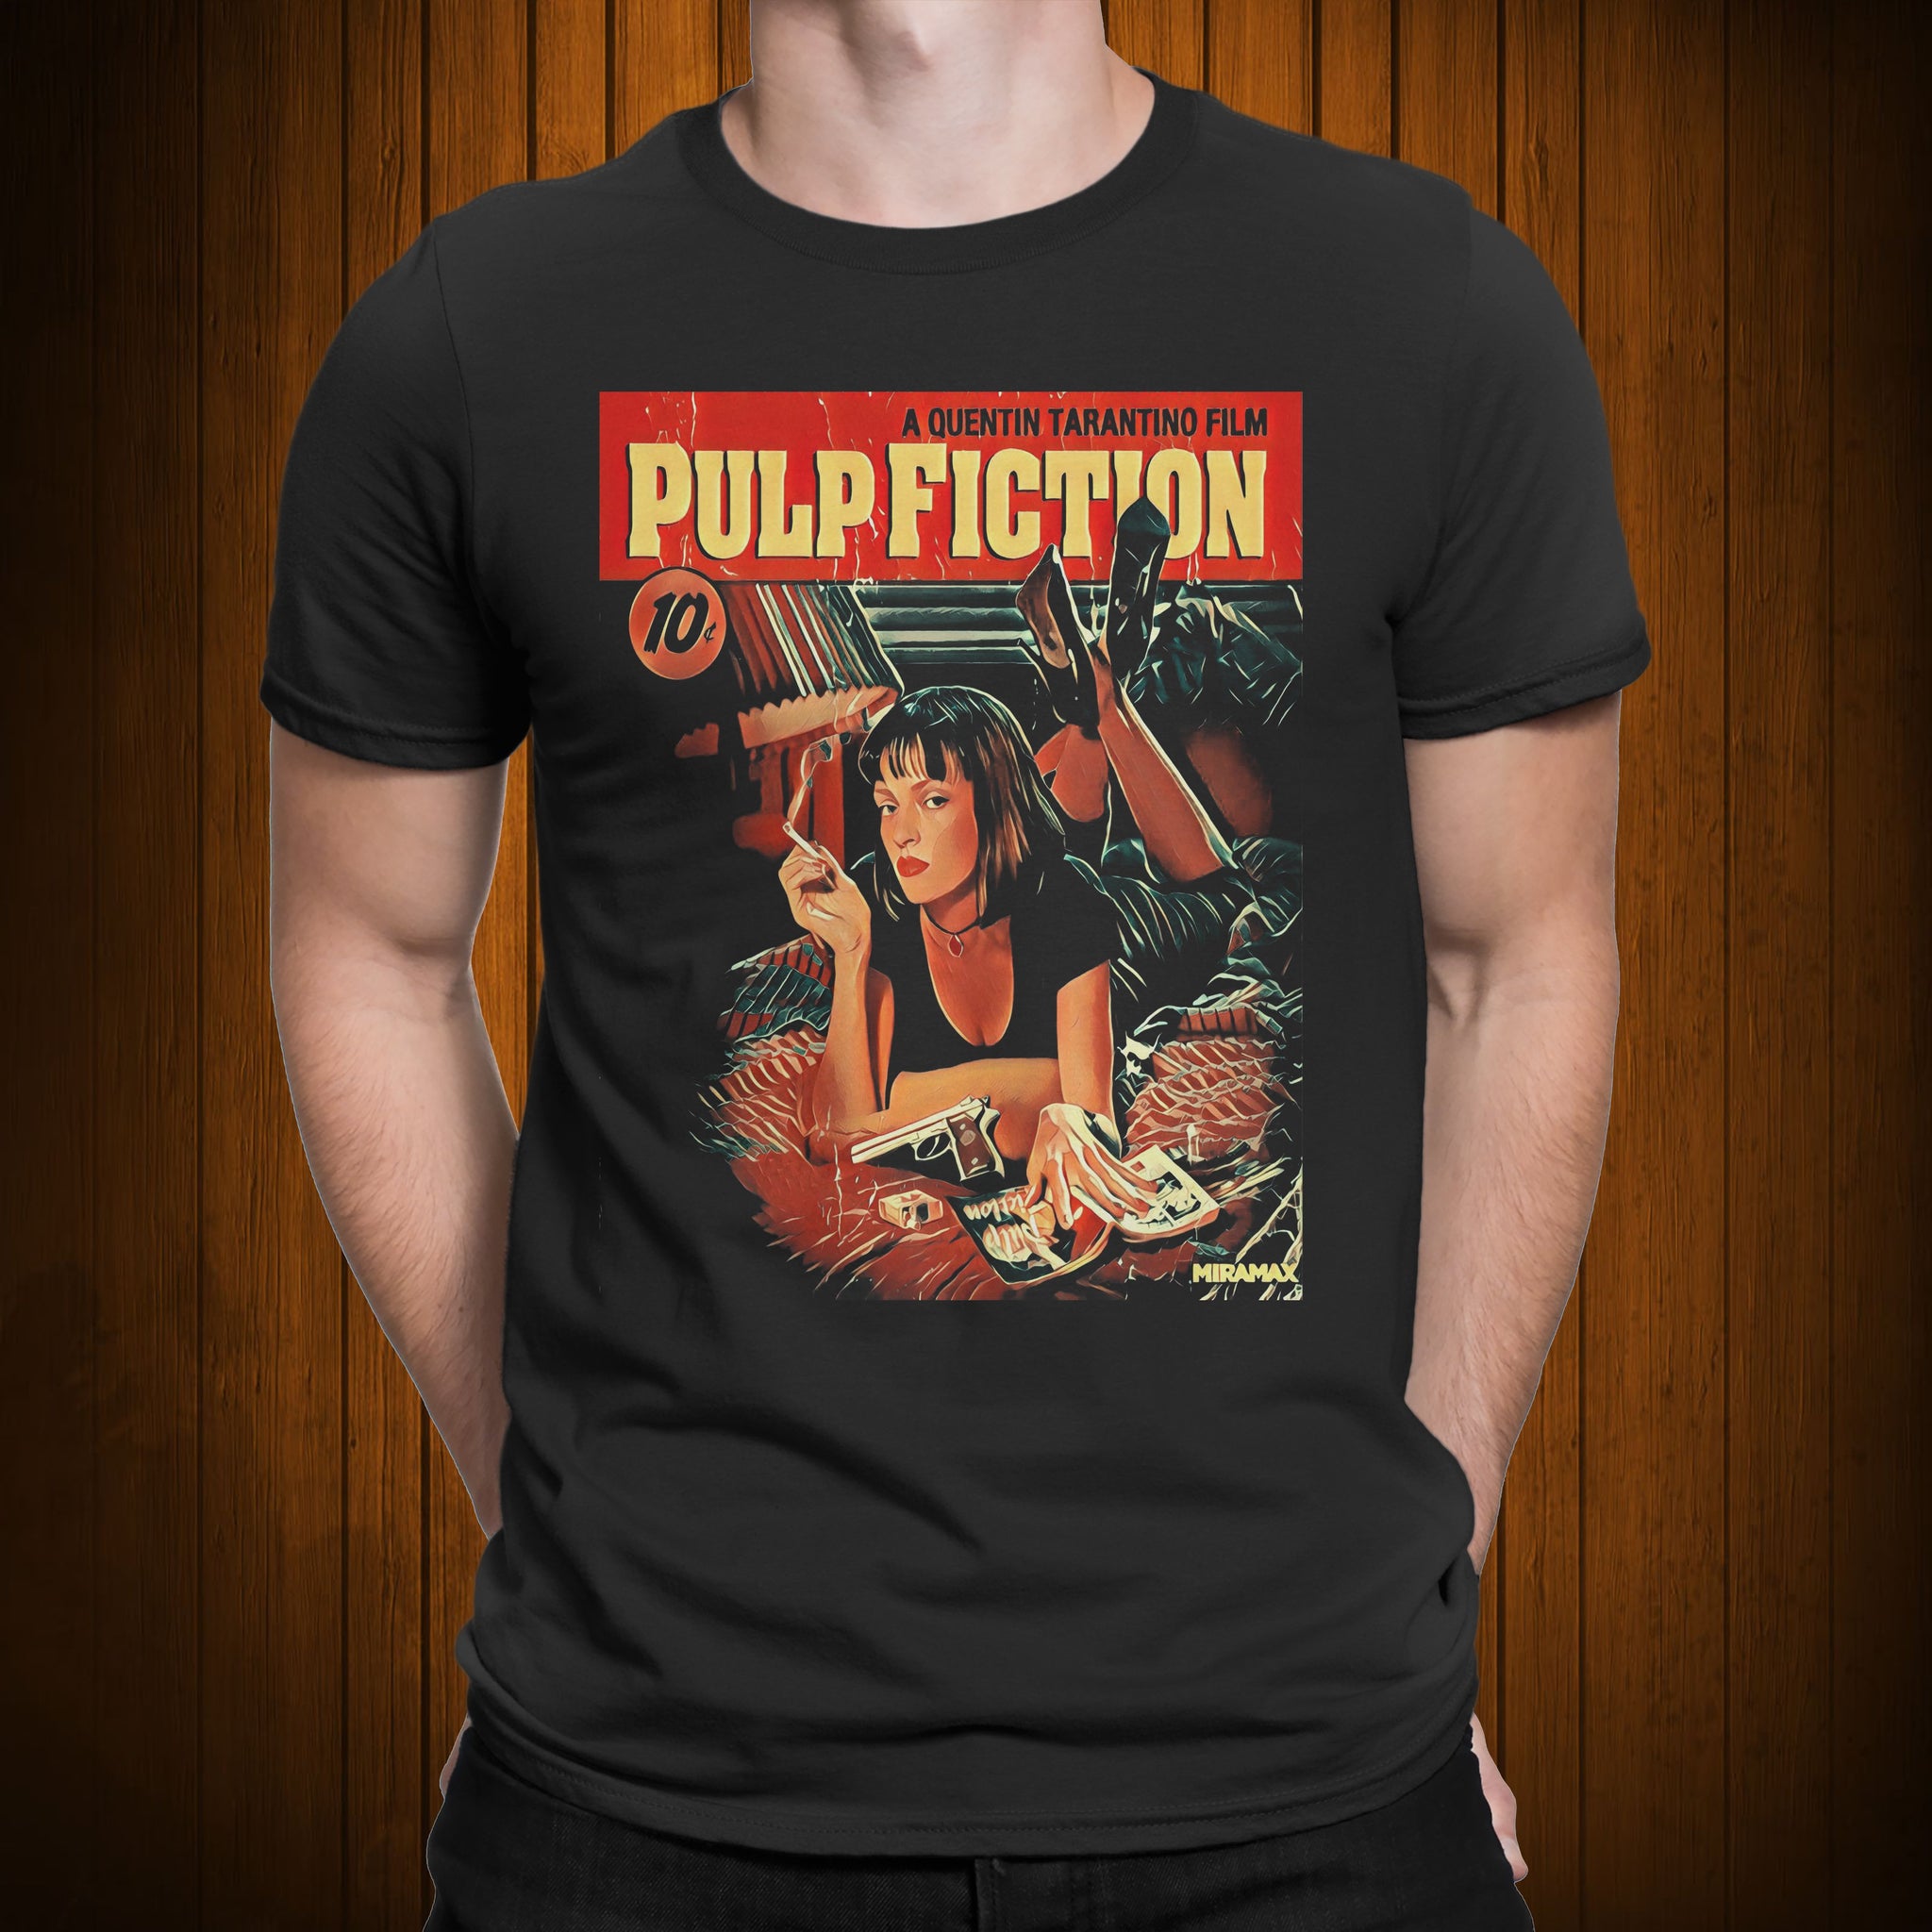 Pulp Fiction "The Cover" Tee